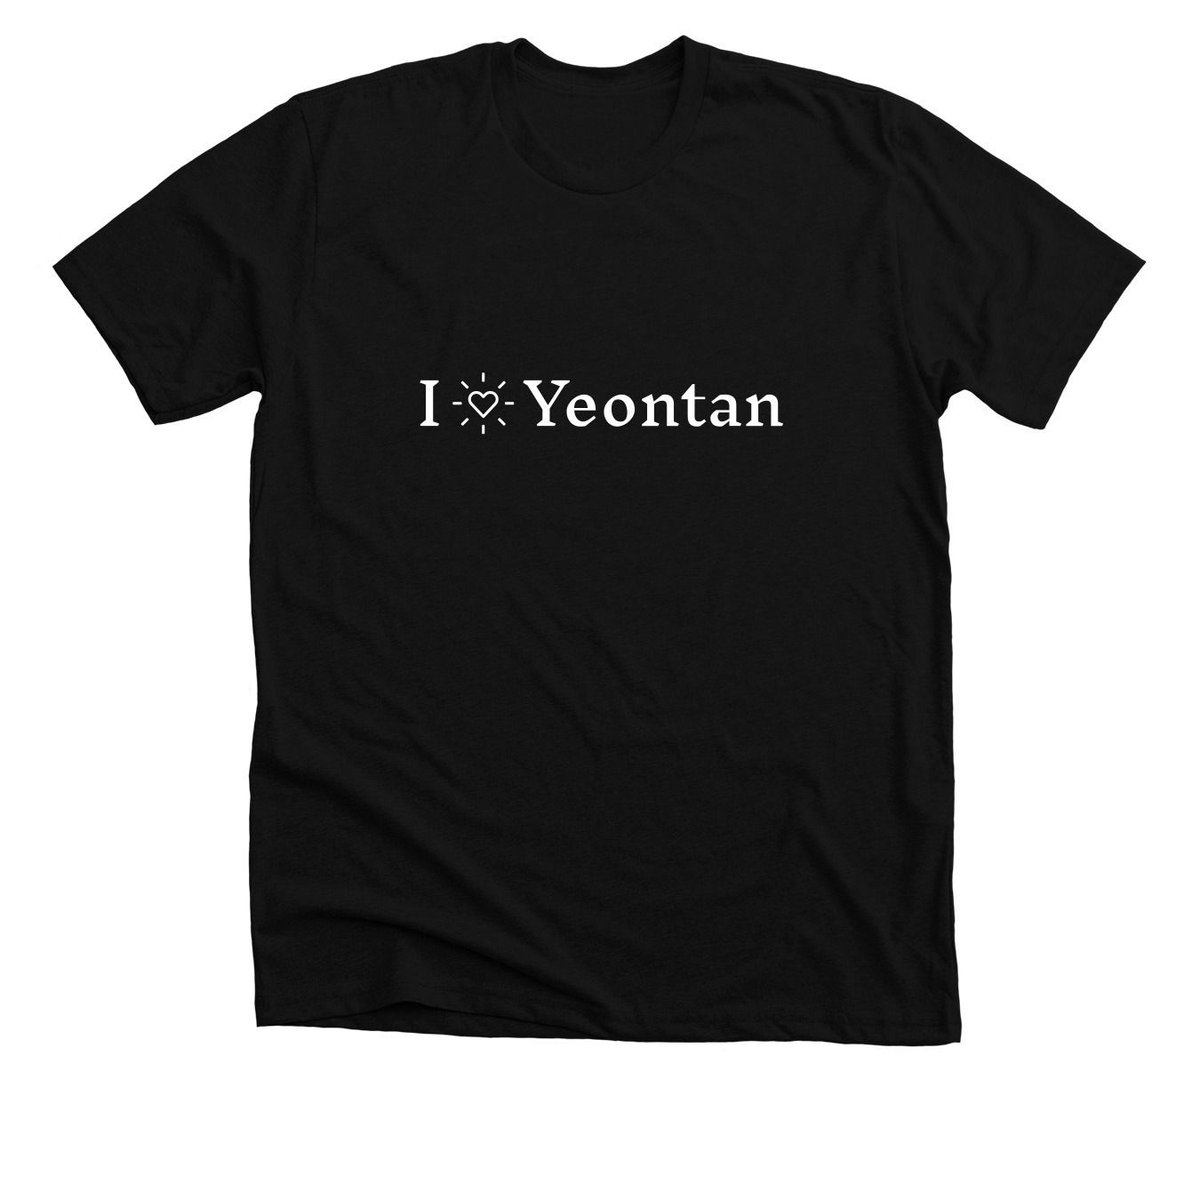 More will be added frequently as they pass through our internal legal review. TAE CREW SHOP to view all the current items. Store tab to store page on the website. 100% of Profits are donated to Taehyung Funds to support the artistry of #kimtaehyung #BTSV 
kimtaehyungglobal.com/store